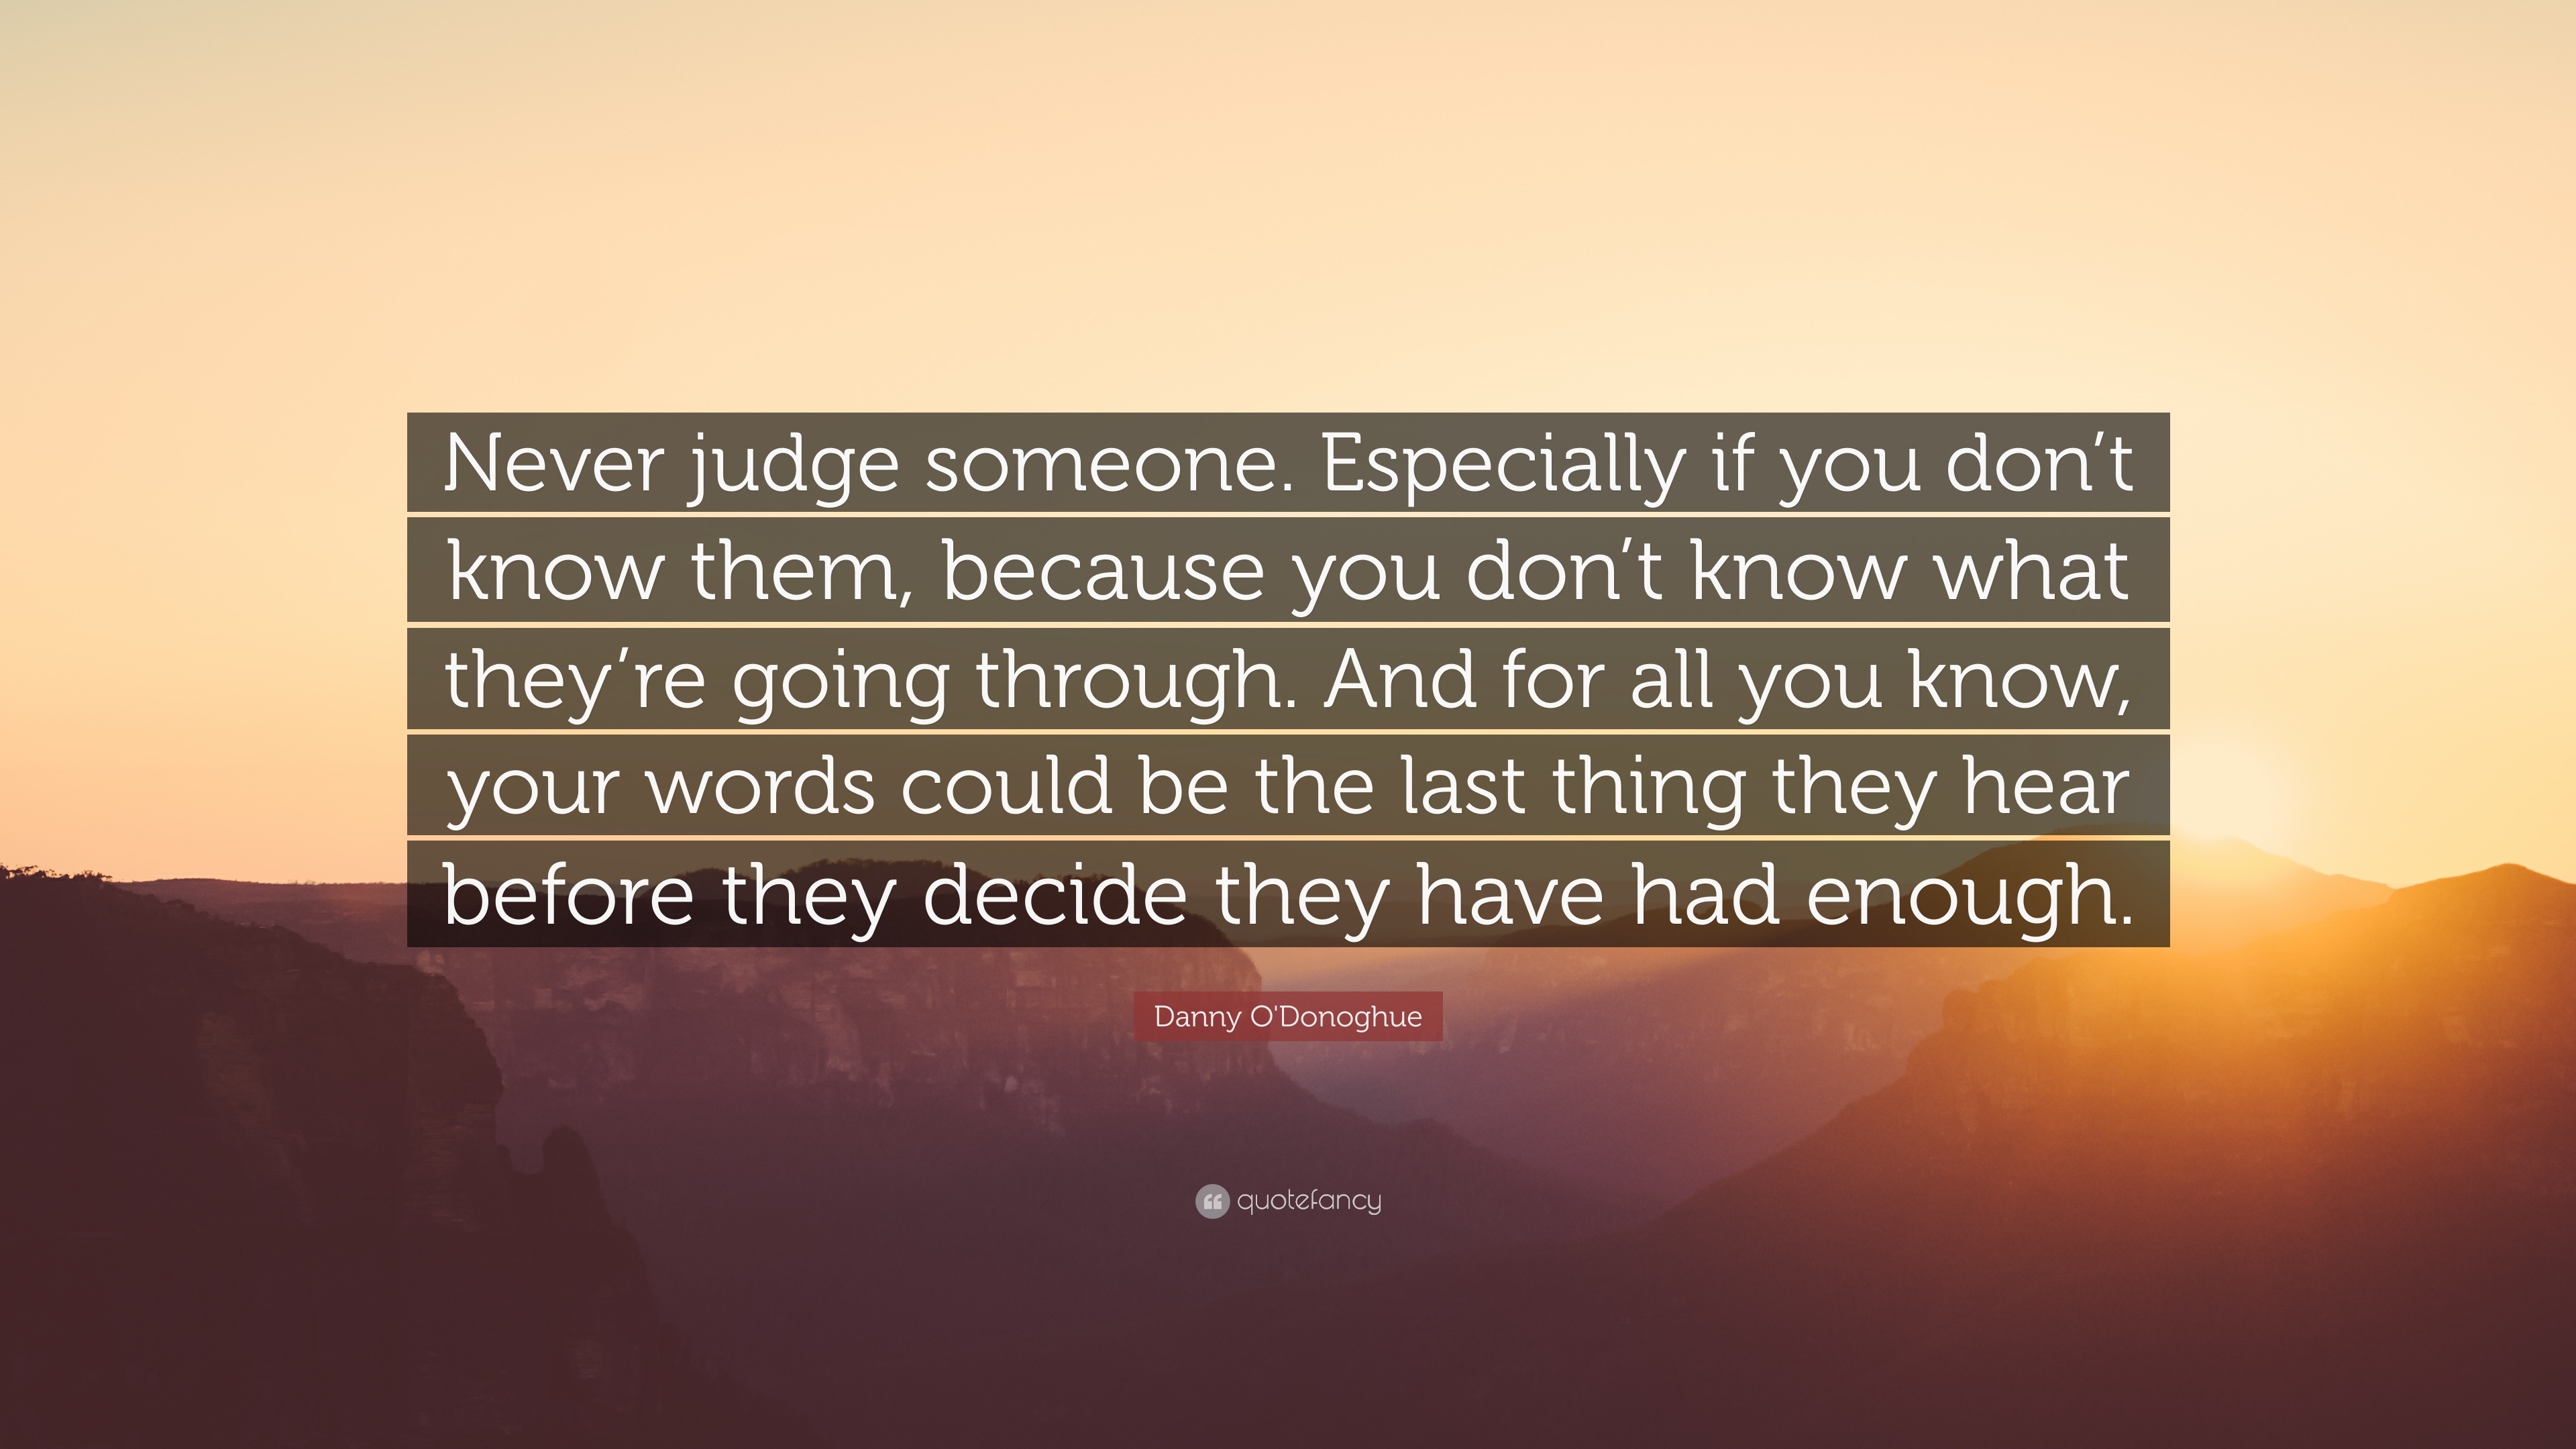 Danny O Donoghue Quote Never Judge Someone Especially If You Don T Know Them Because You Don T Know What They Re Going Through And For All Y